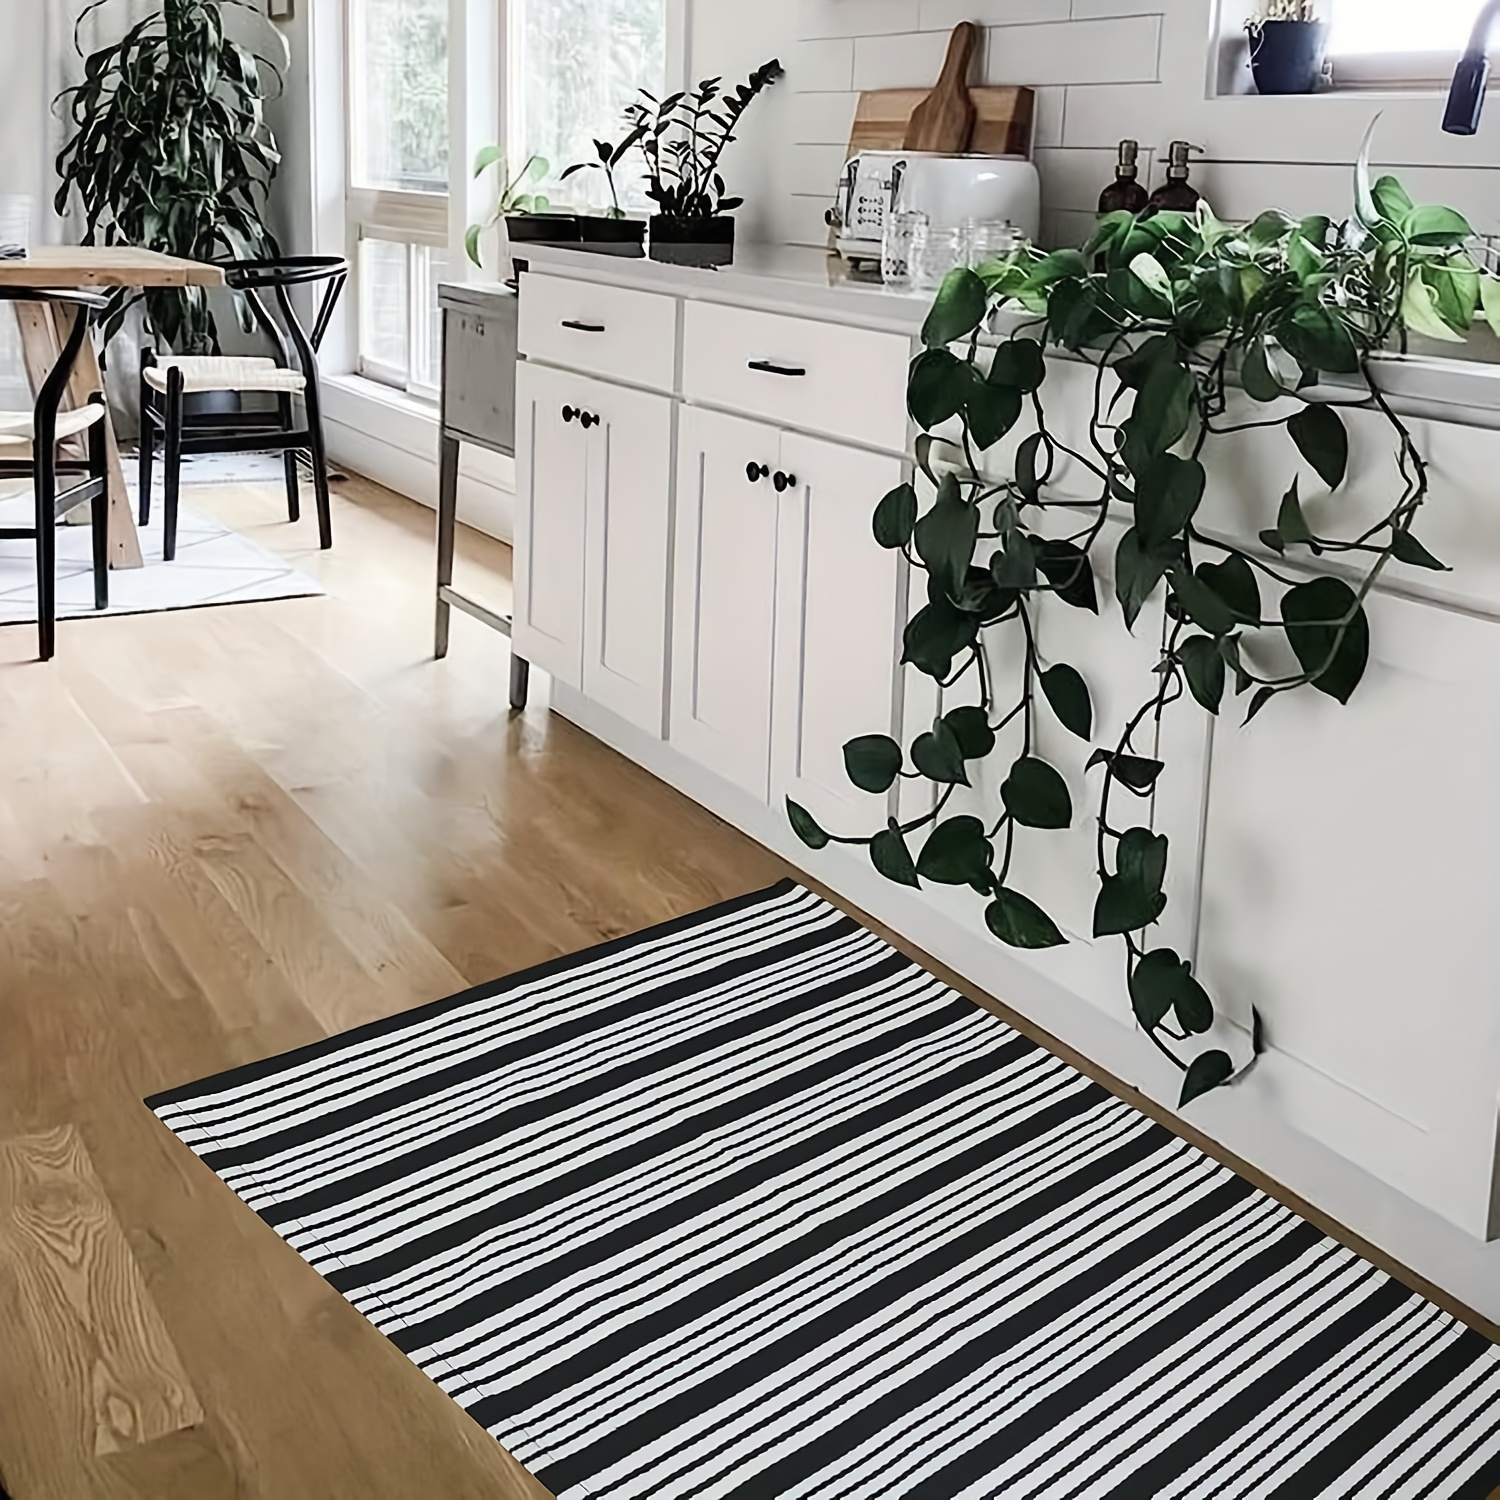 FH Home Outdoor Rug - Reversible - Indoor Use, Kids Room, Mudroom - Stain  Resistant, Easy to Clean Weather Resistant Floor Mats - Brittany Stripe -  Black & White (6 ft x 9 ft) 